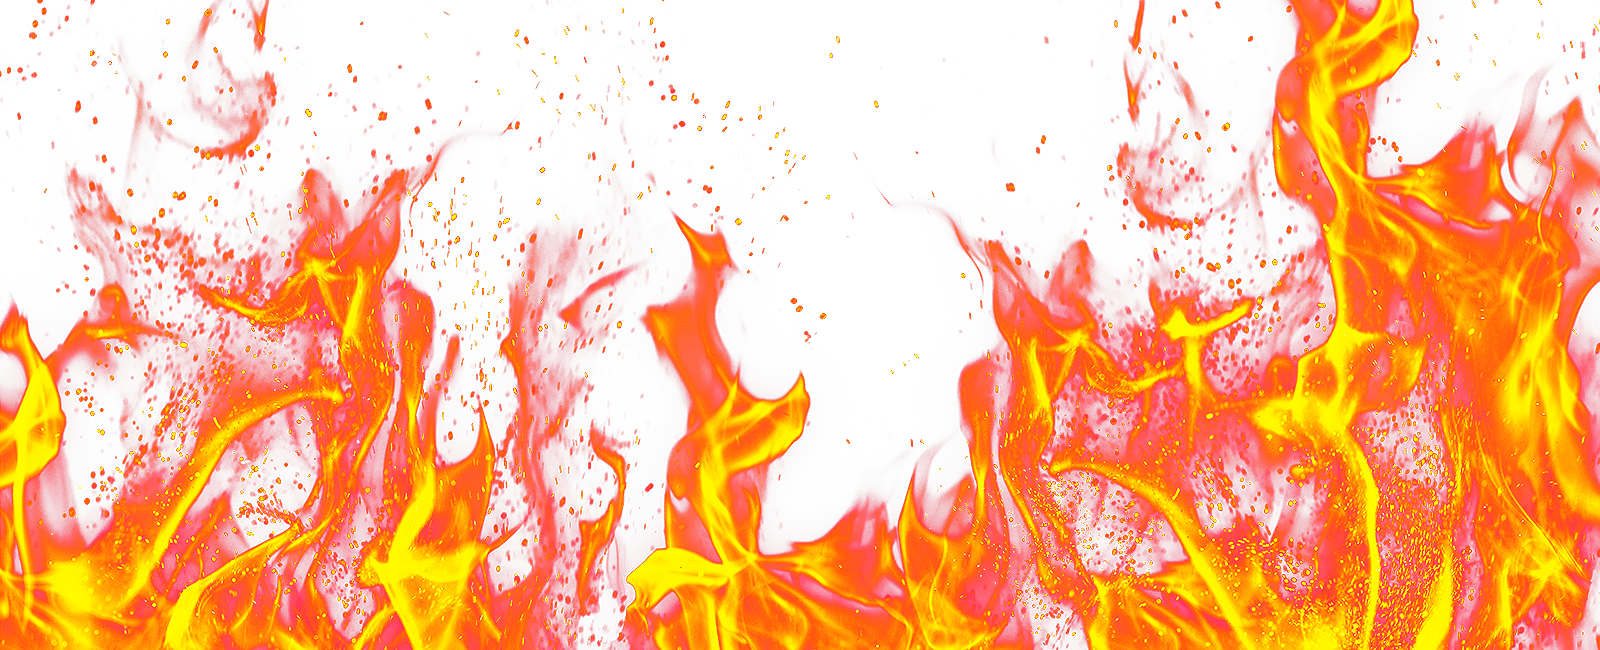 Fire Flaming Ground PNG Image